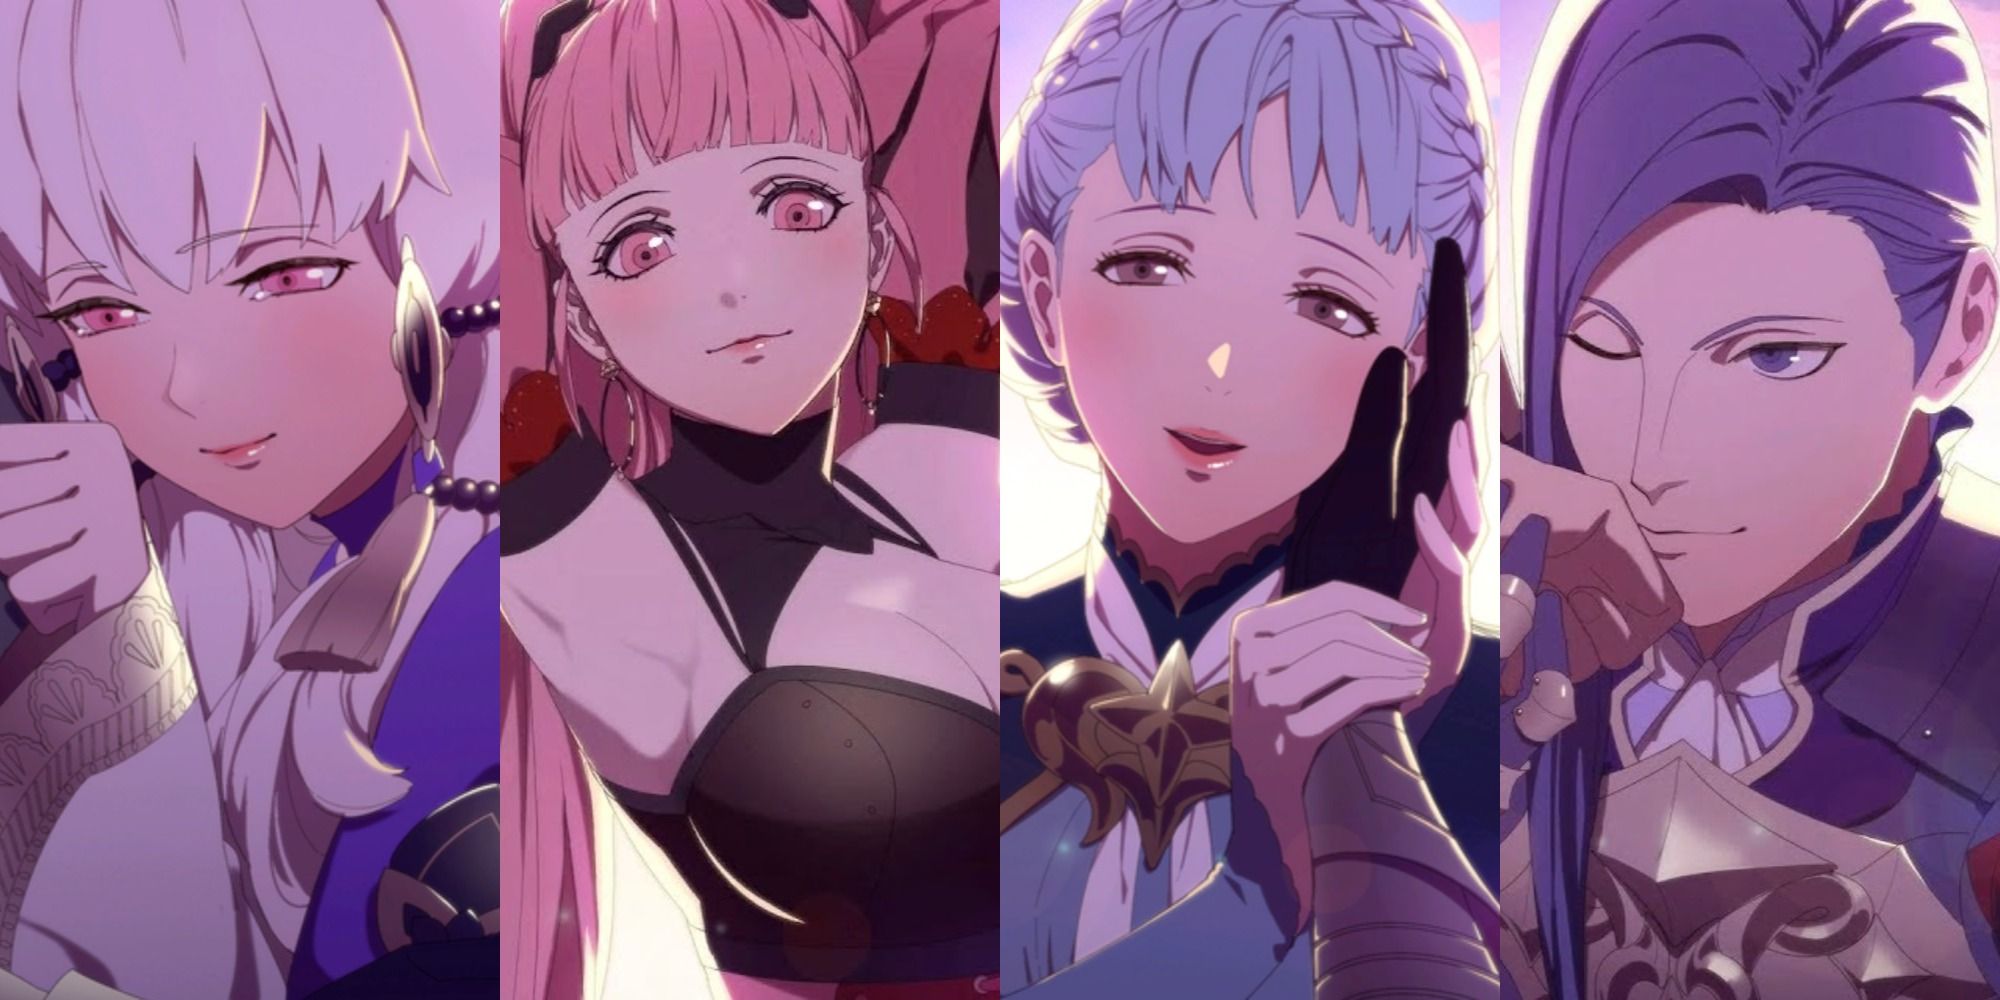 Compilation of Golden Deer characters from Fire Emblem Three Houses.